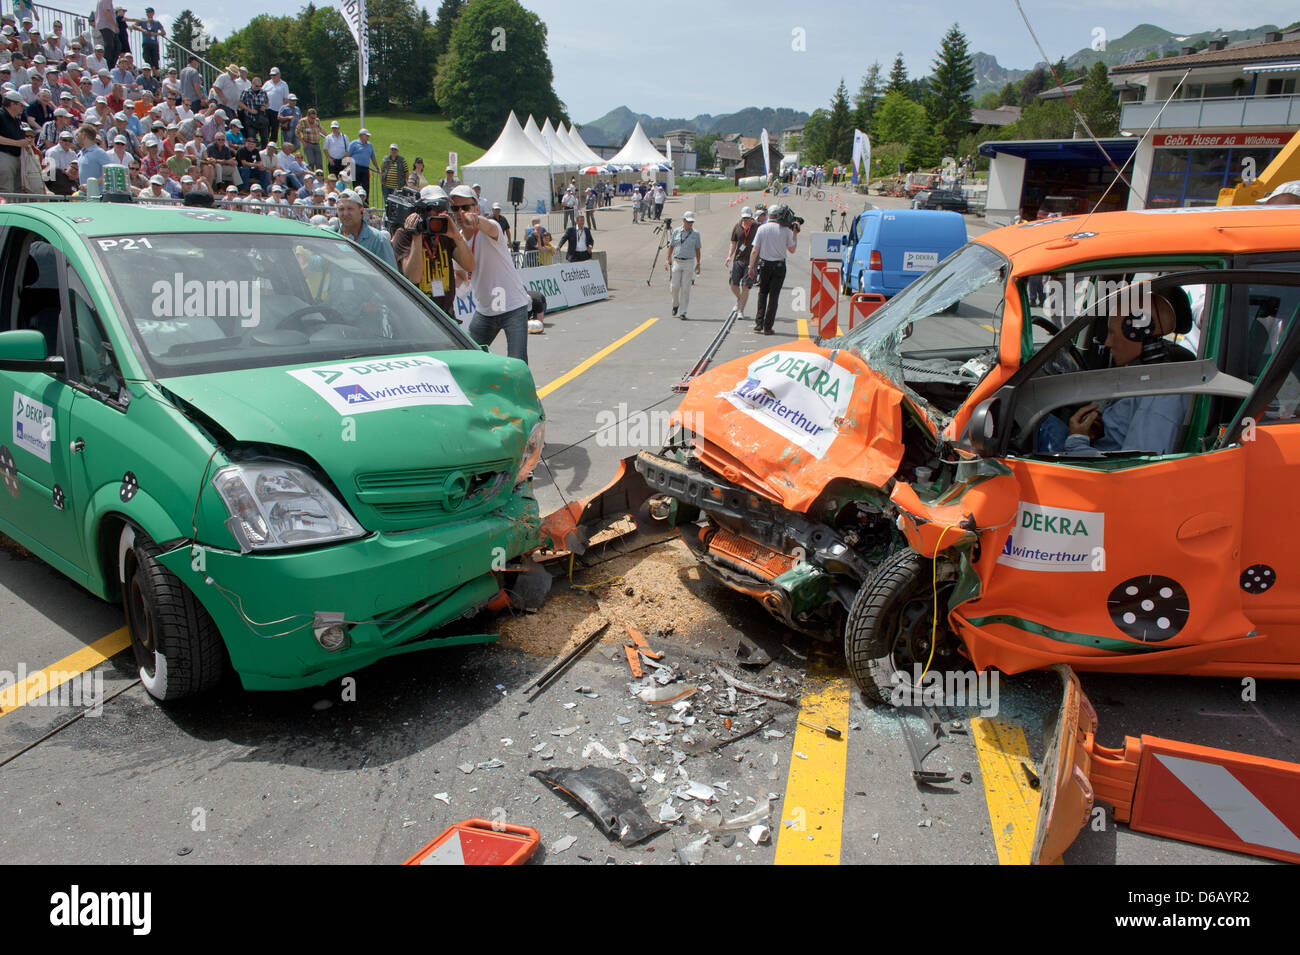 Two test vehichles sit on a Dekra test track after a crash test in  Wildhaus-Alt St. Johann, Switzerland, 28 June 2012. During the simulation,  a van crashed head-on into a car in